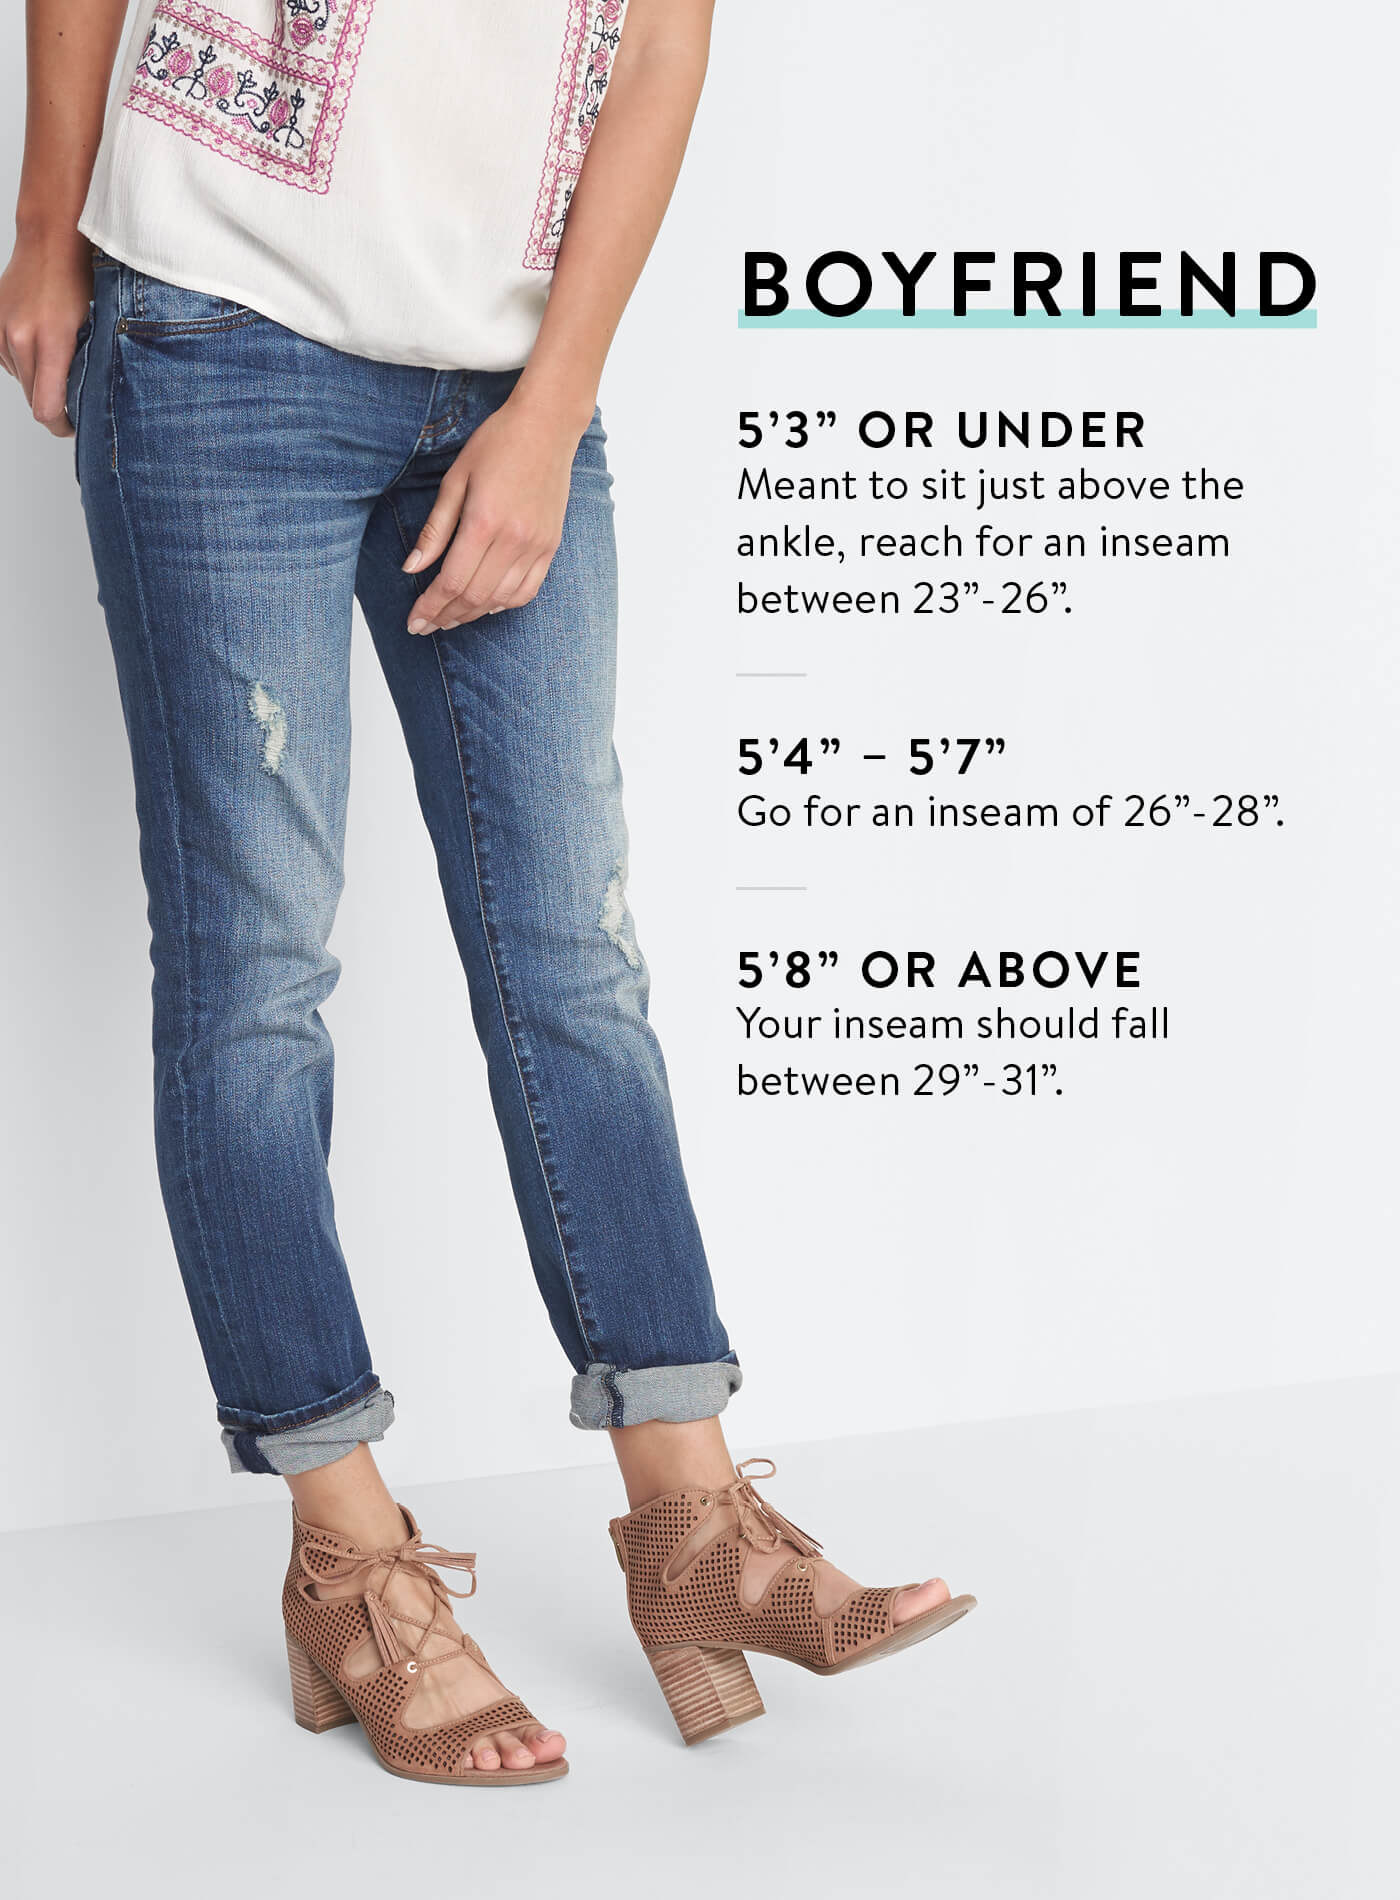 old navy jean guide